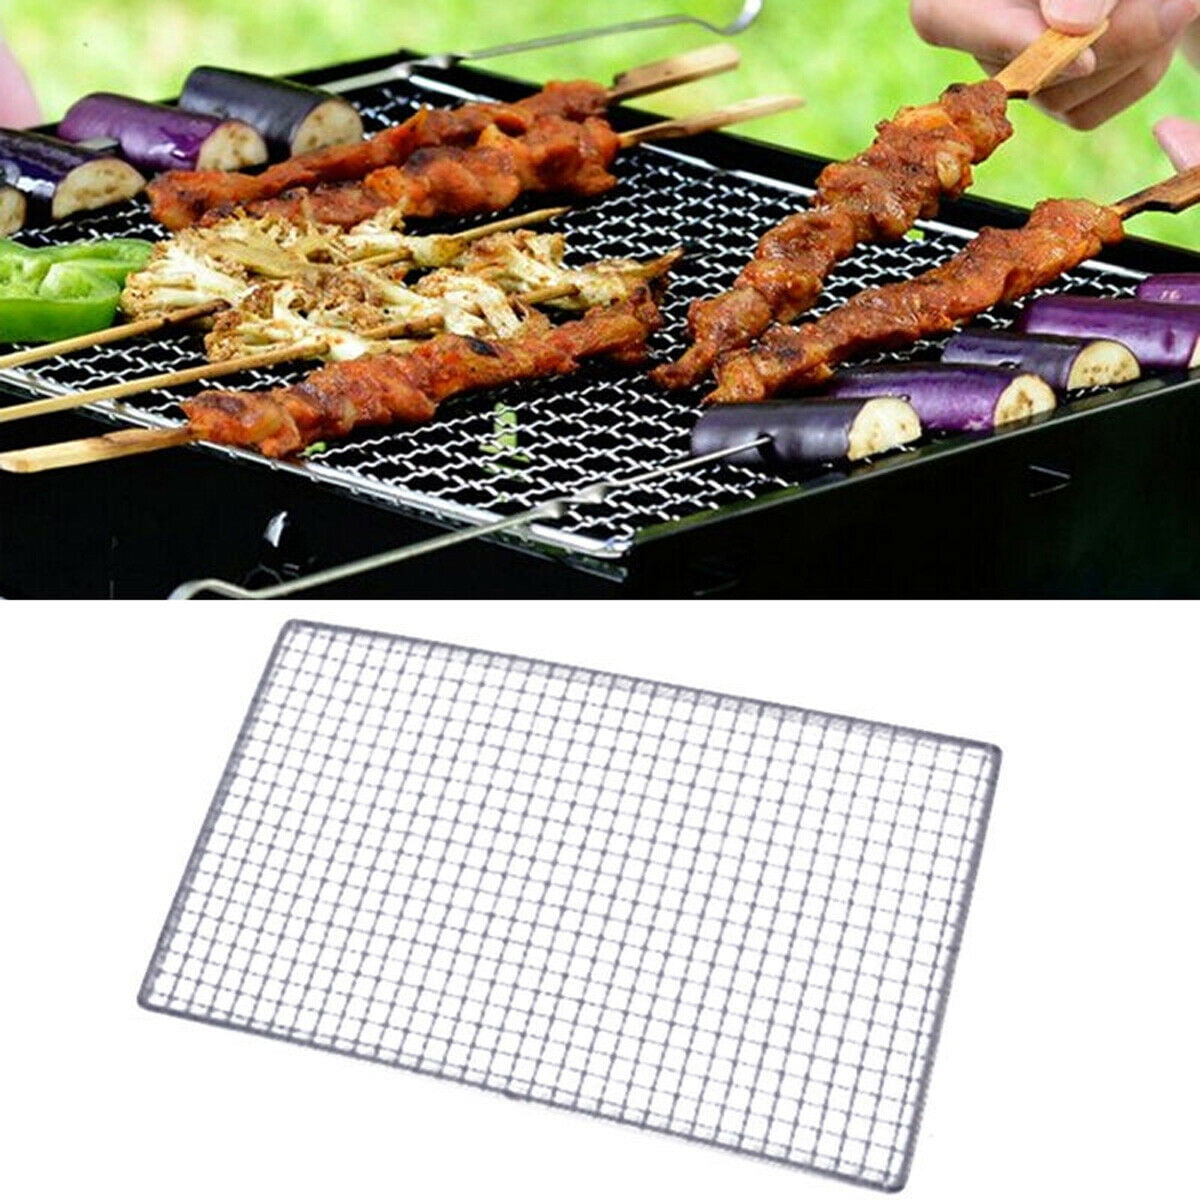 BBQ Grill Stainless Steel Grate Grid Wire Mesh Rack Cooking 